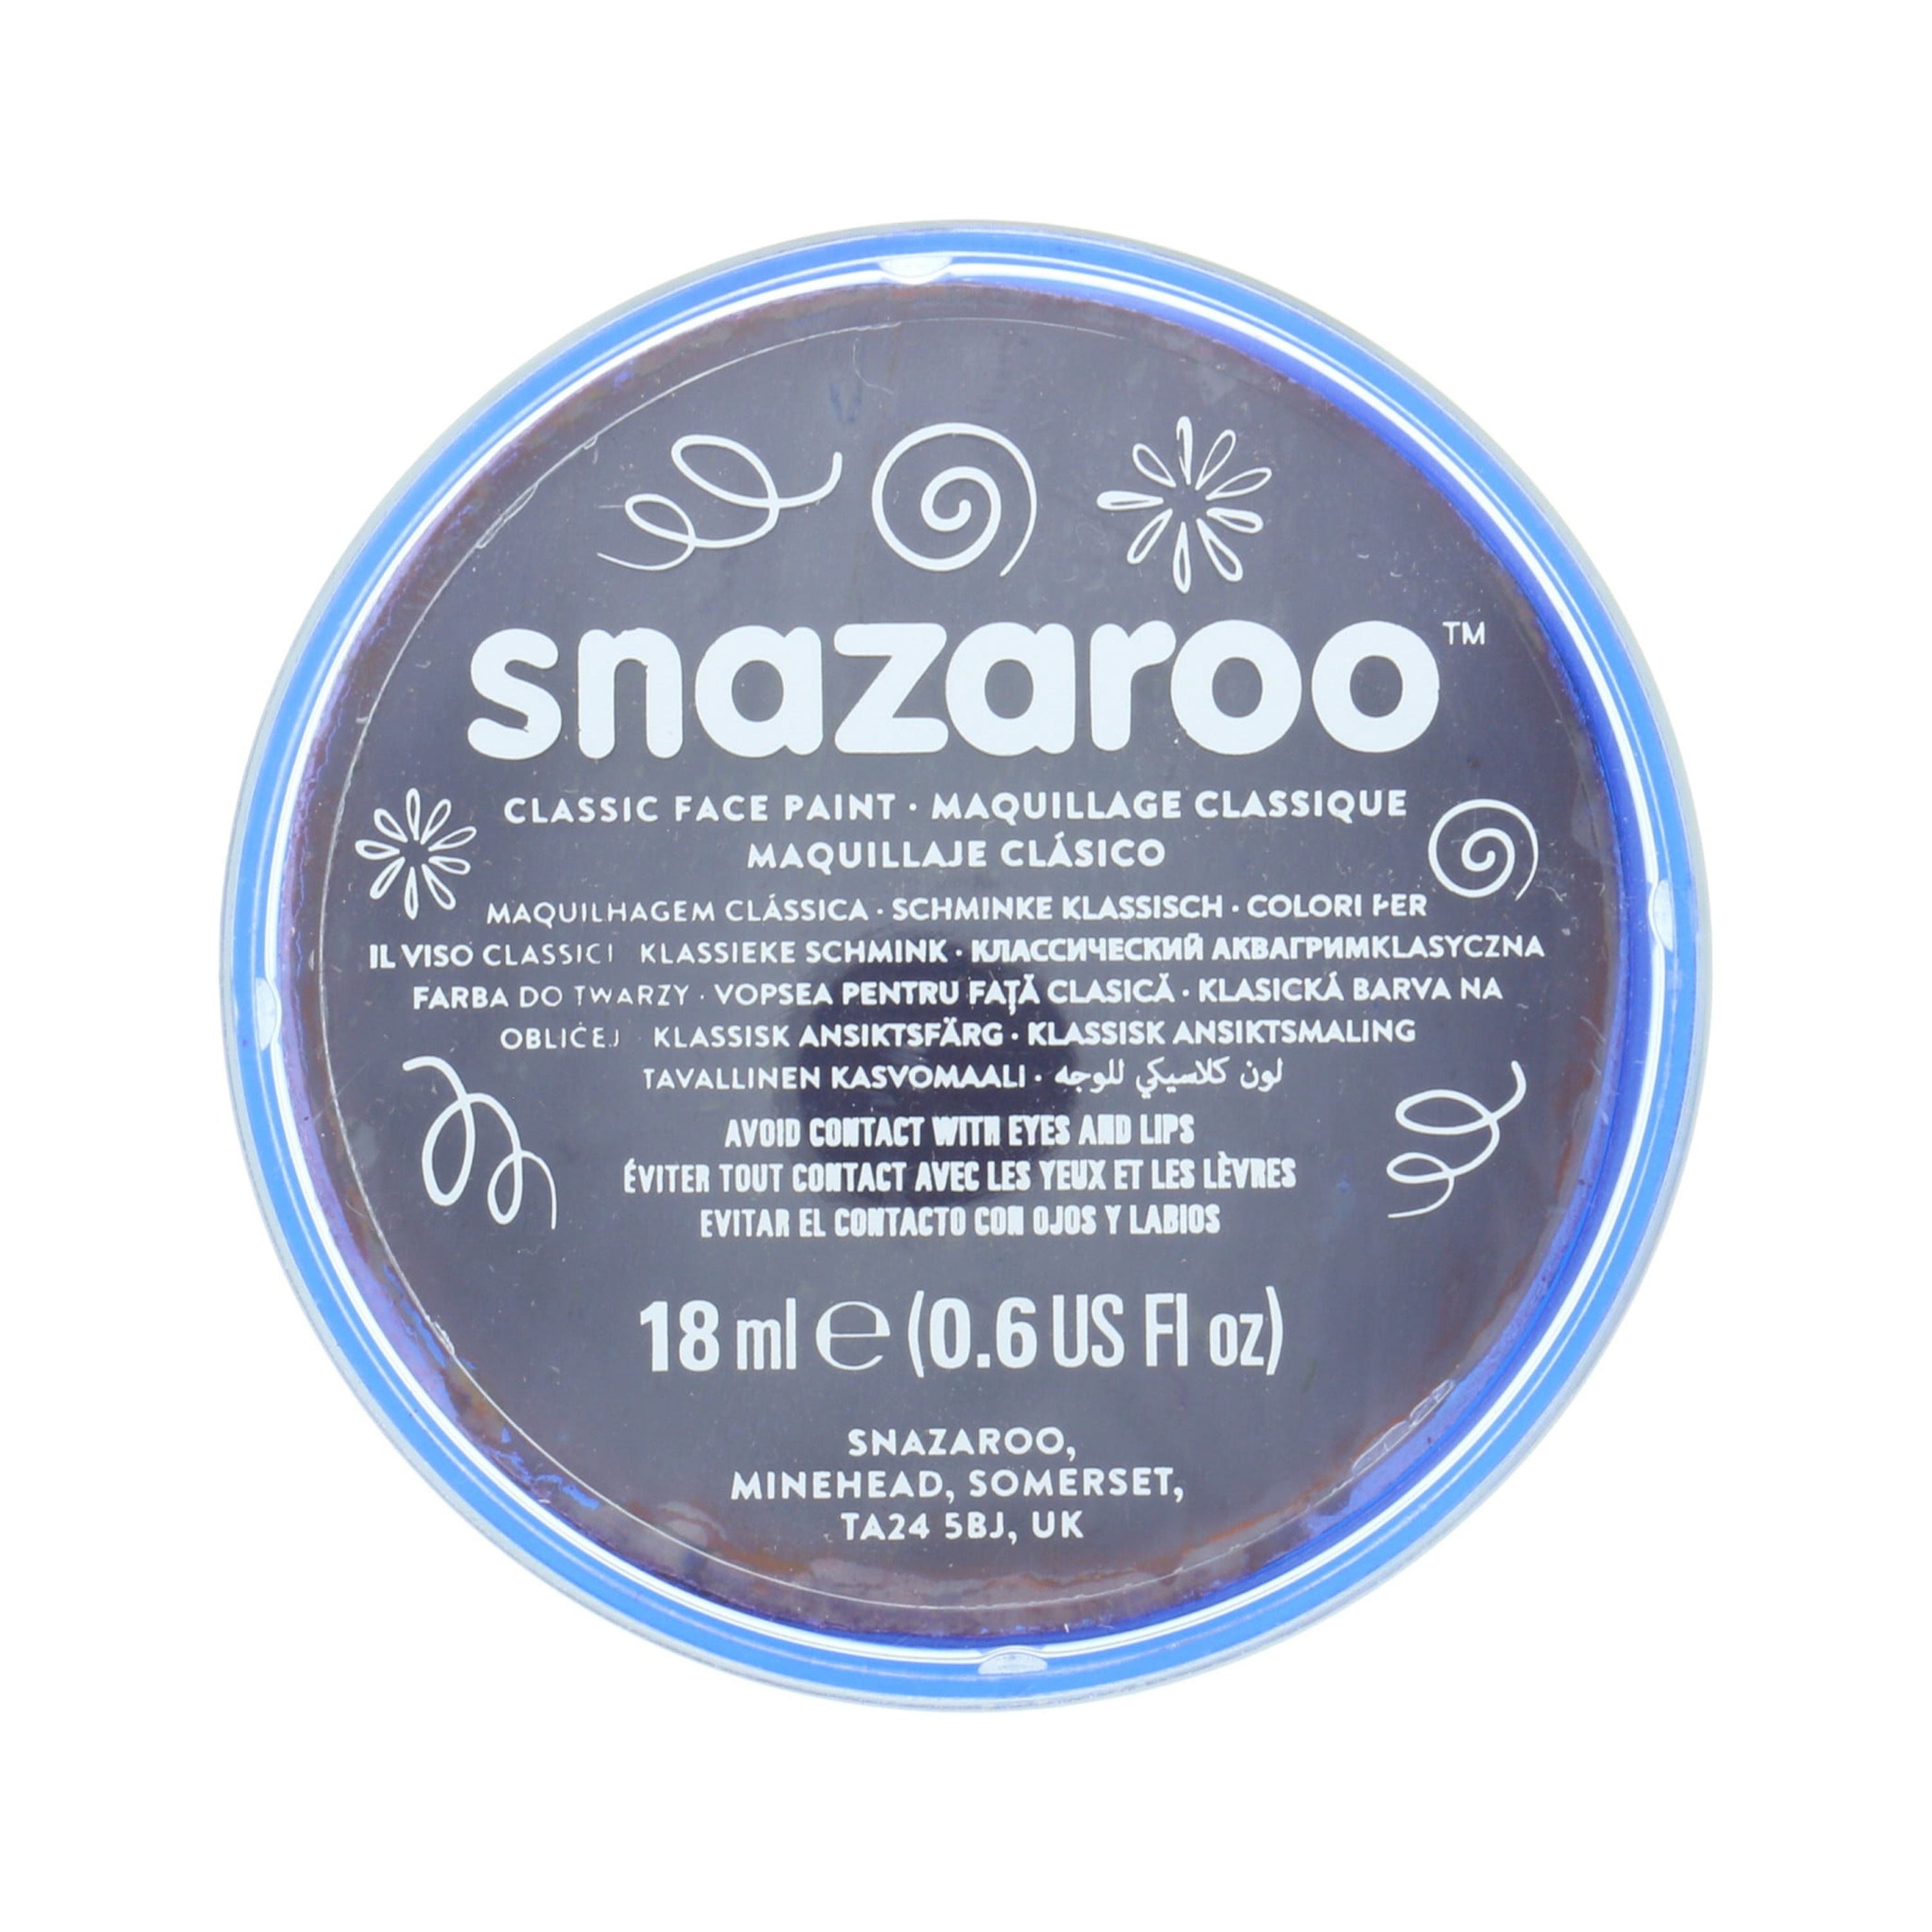 Snazaroo Classic Face Paint, 18ml, Pale Yellow 